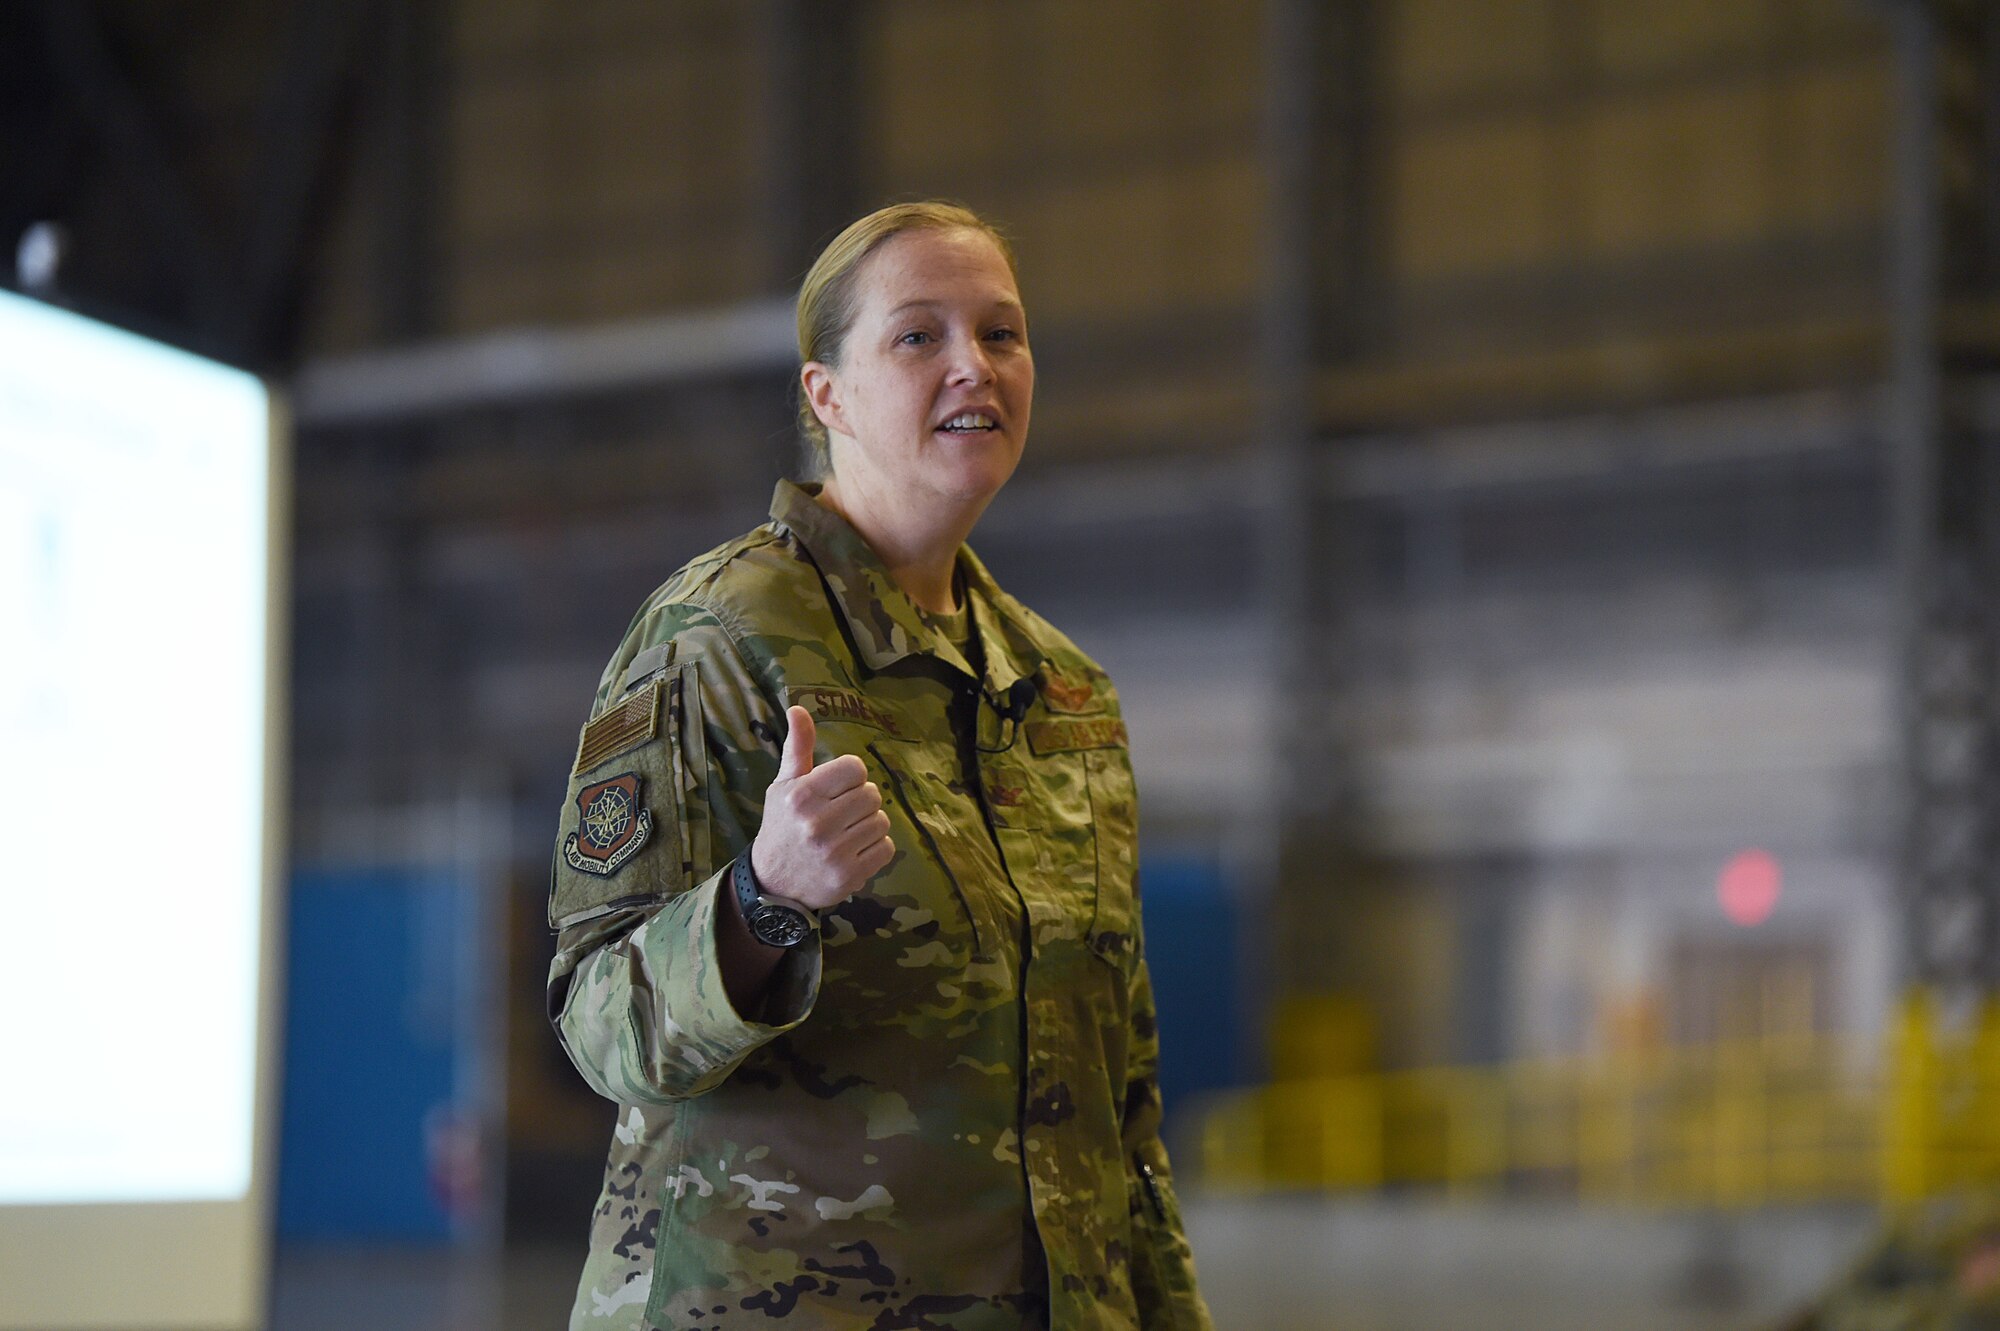 Col. Erin Staine-Pyne, 62nd Airlift Wing commander, speaks to members of the wing during a commander’s call Jan. 16, 2020 at Joint Base Lewis-McChord, Wash. One of her top priorities as commander is making sure Airmen are restoring readiness to win any fight at any time. (U.S. Air Force photo by Airman 1st Class Mikayla Heineck)